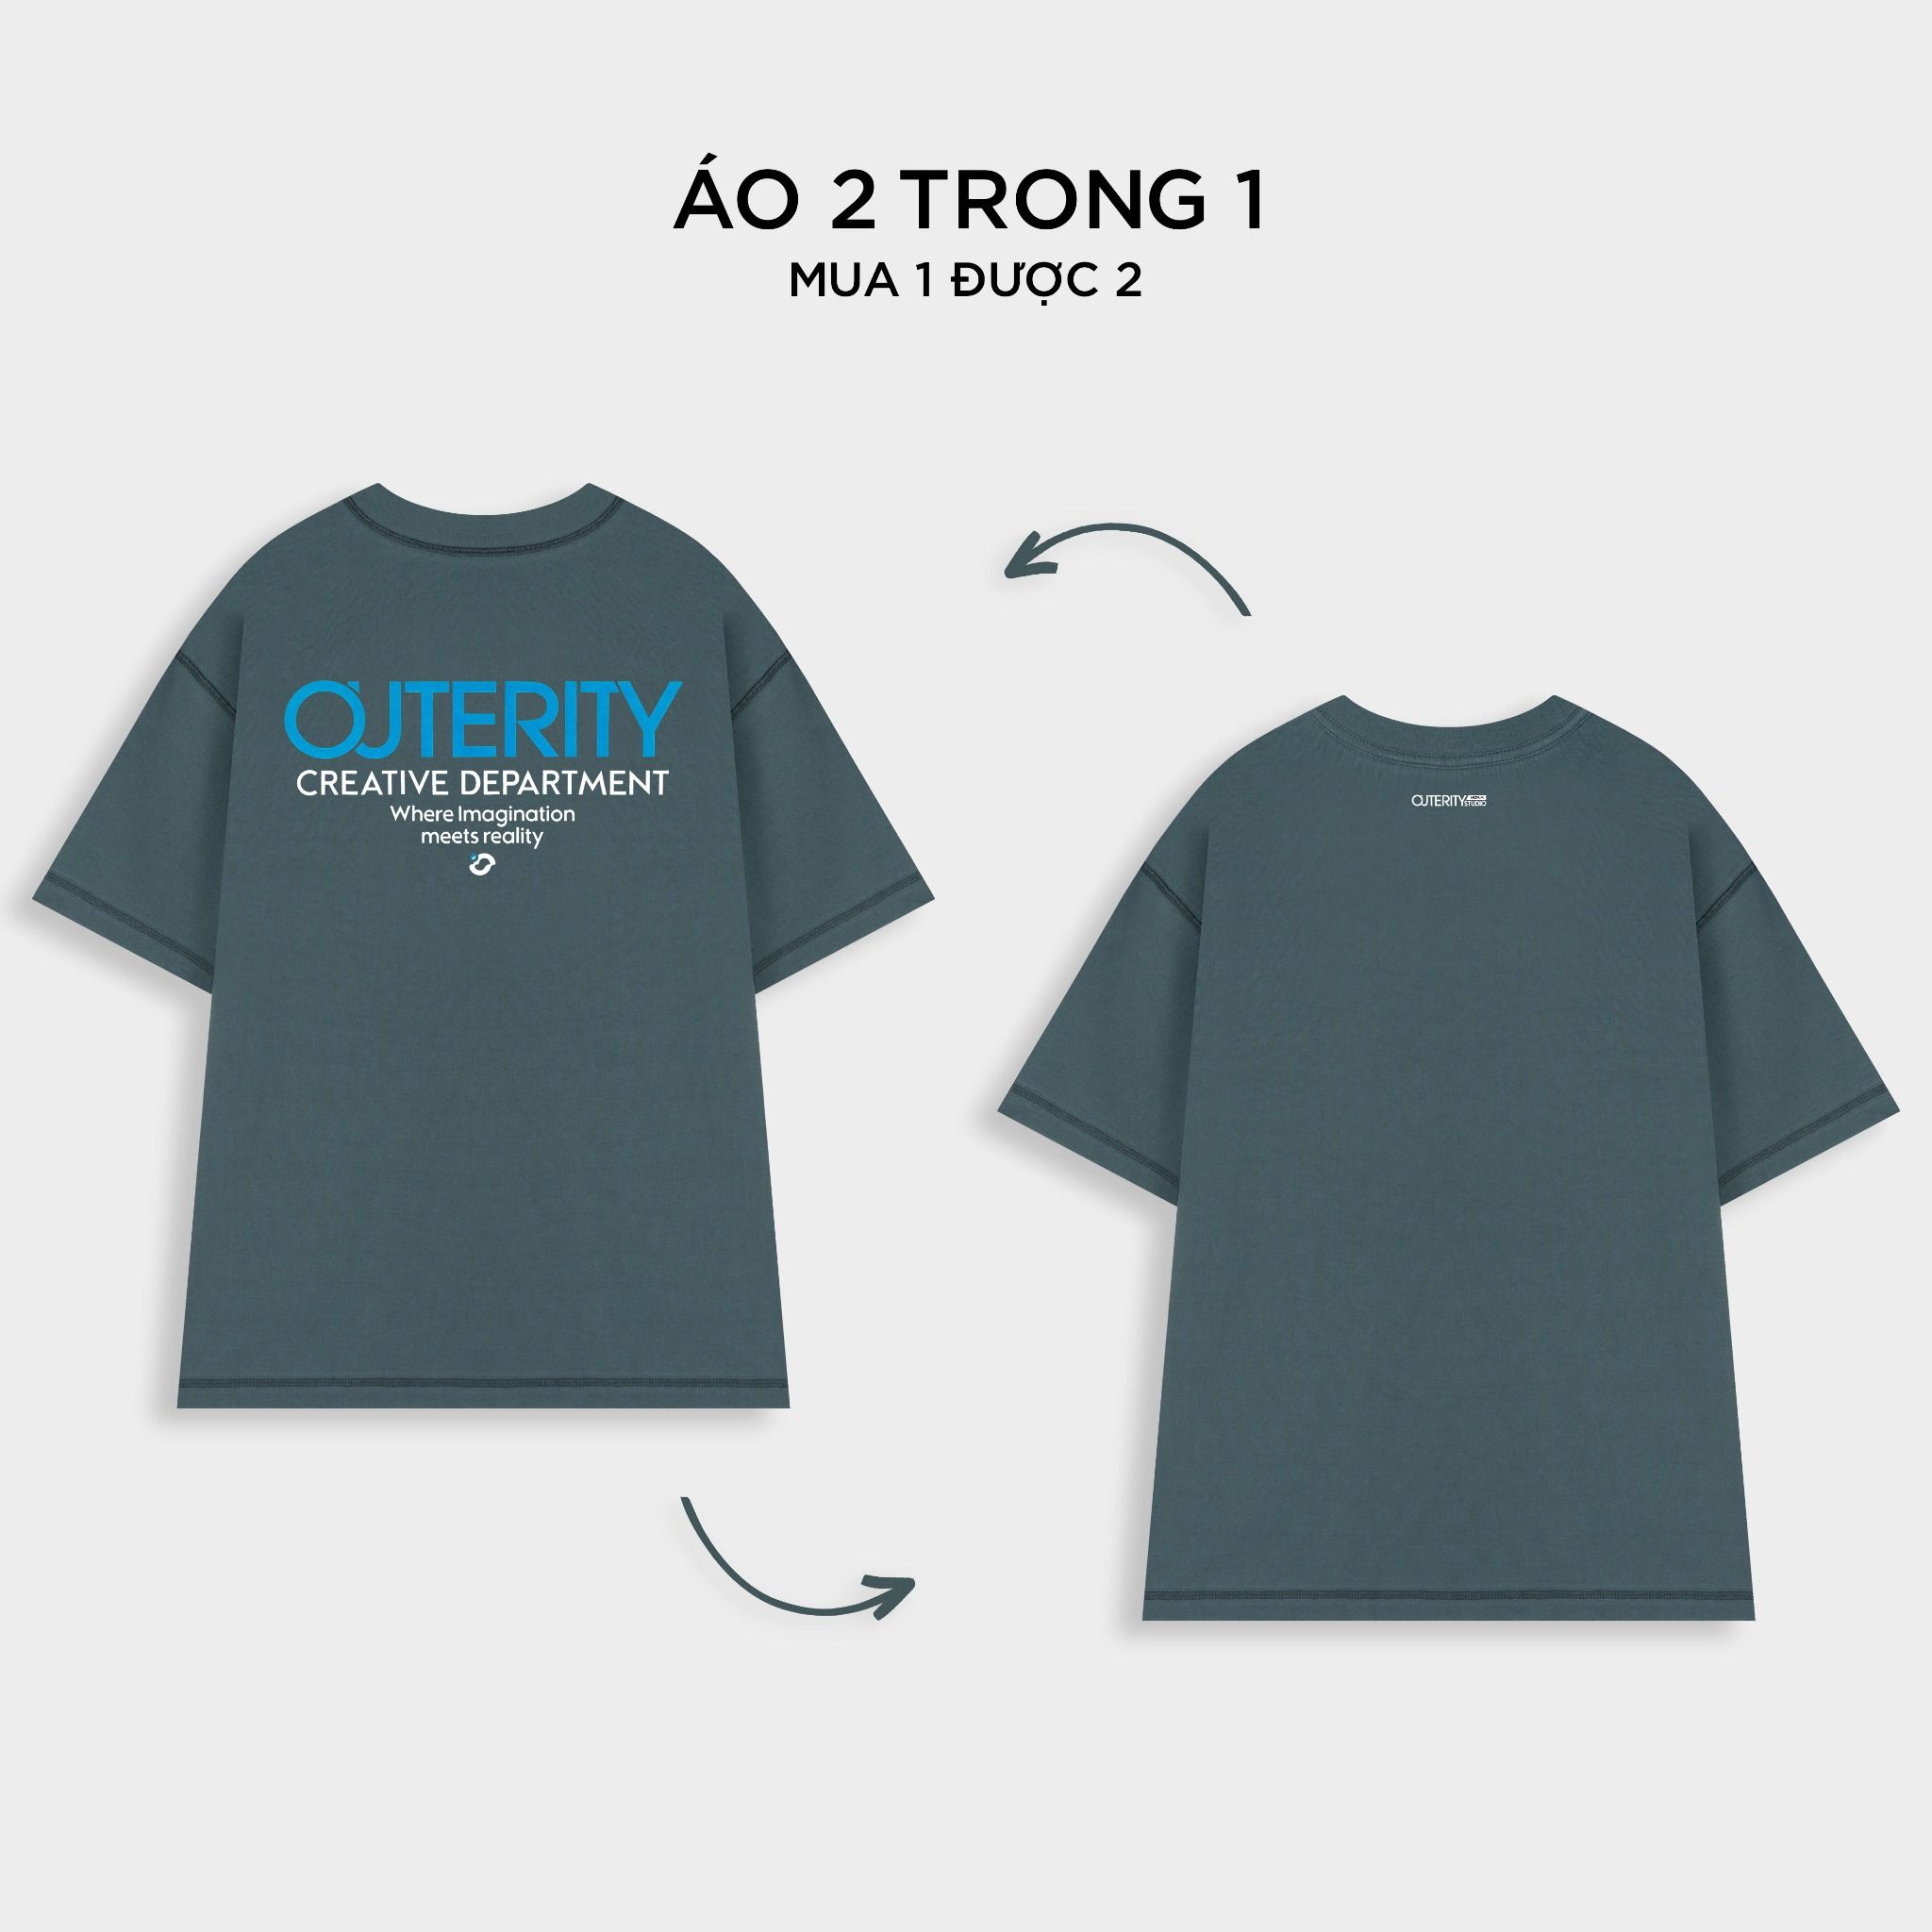  Outerity Double Tee Collection - Blue Heart / Dark Slate 